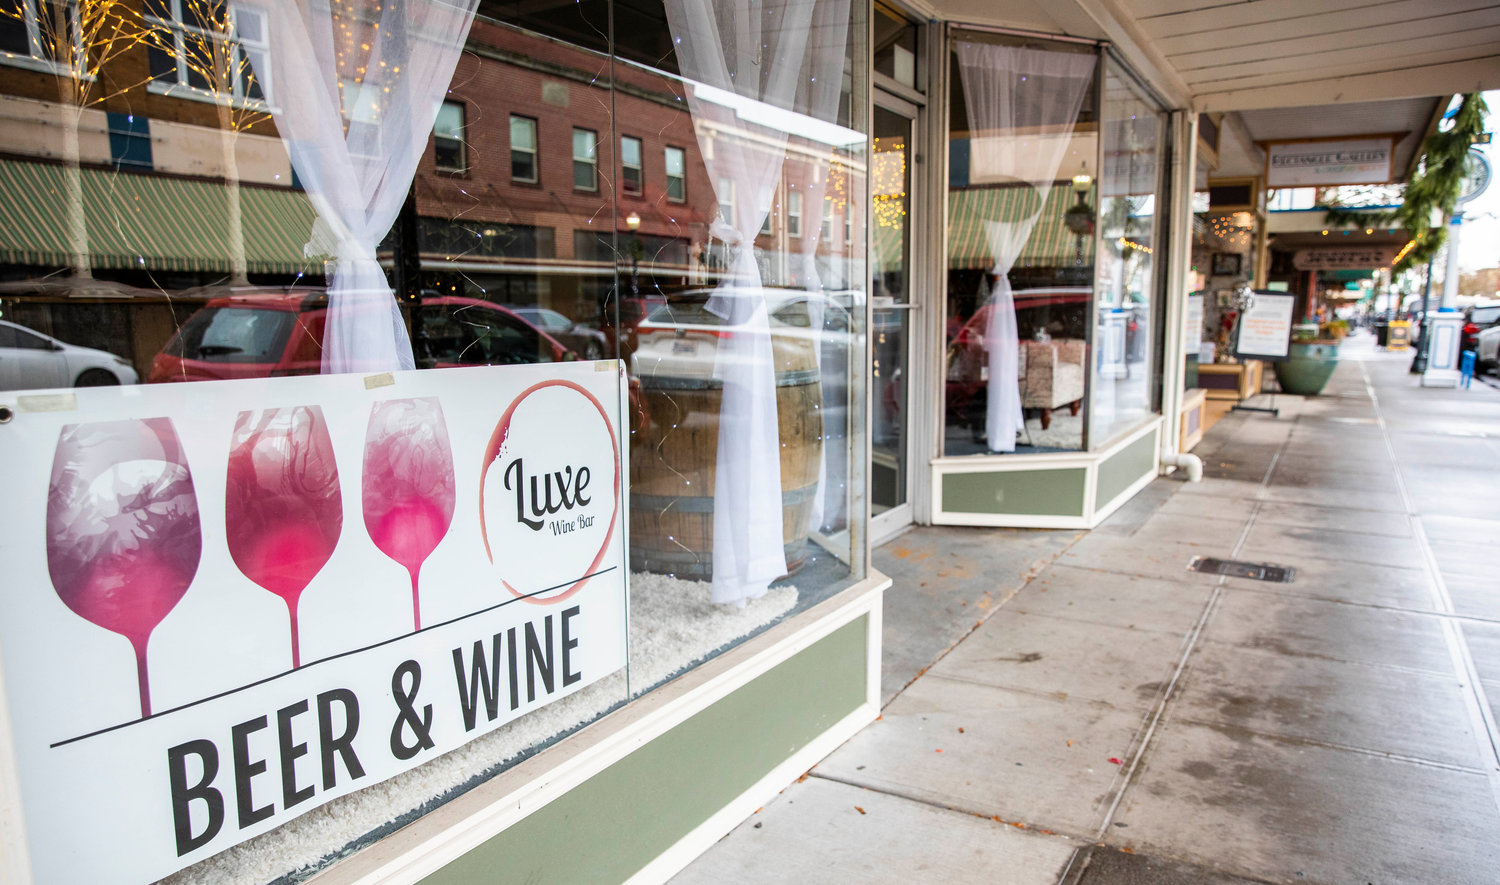 The Luxe Wine Bar is located at 207 N. Tower Avenue in Centralia.